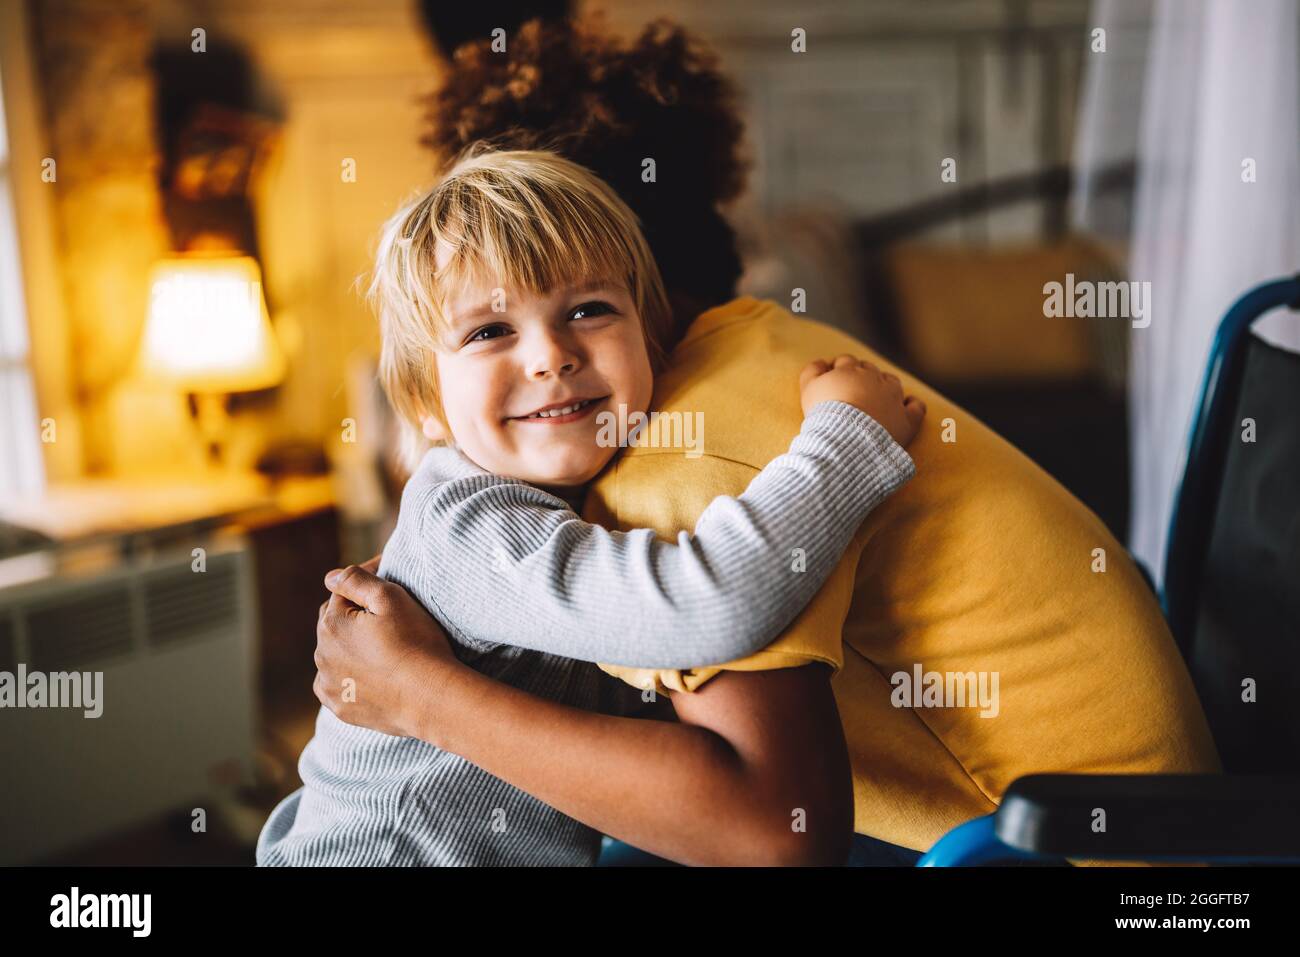 Happy multiethnic family. Smiling little girl with disability in wheelchair at home Stock Photo